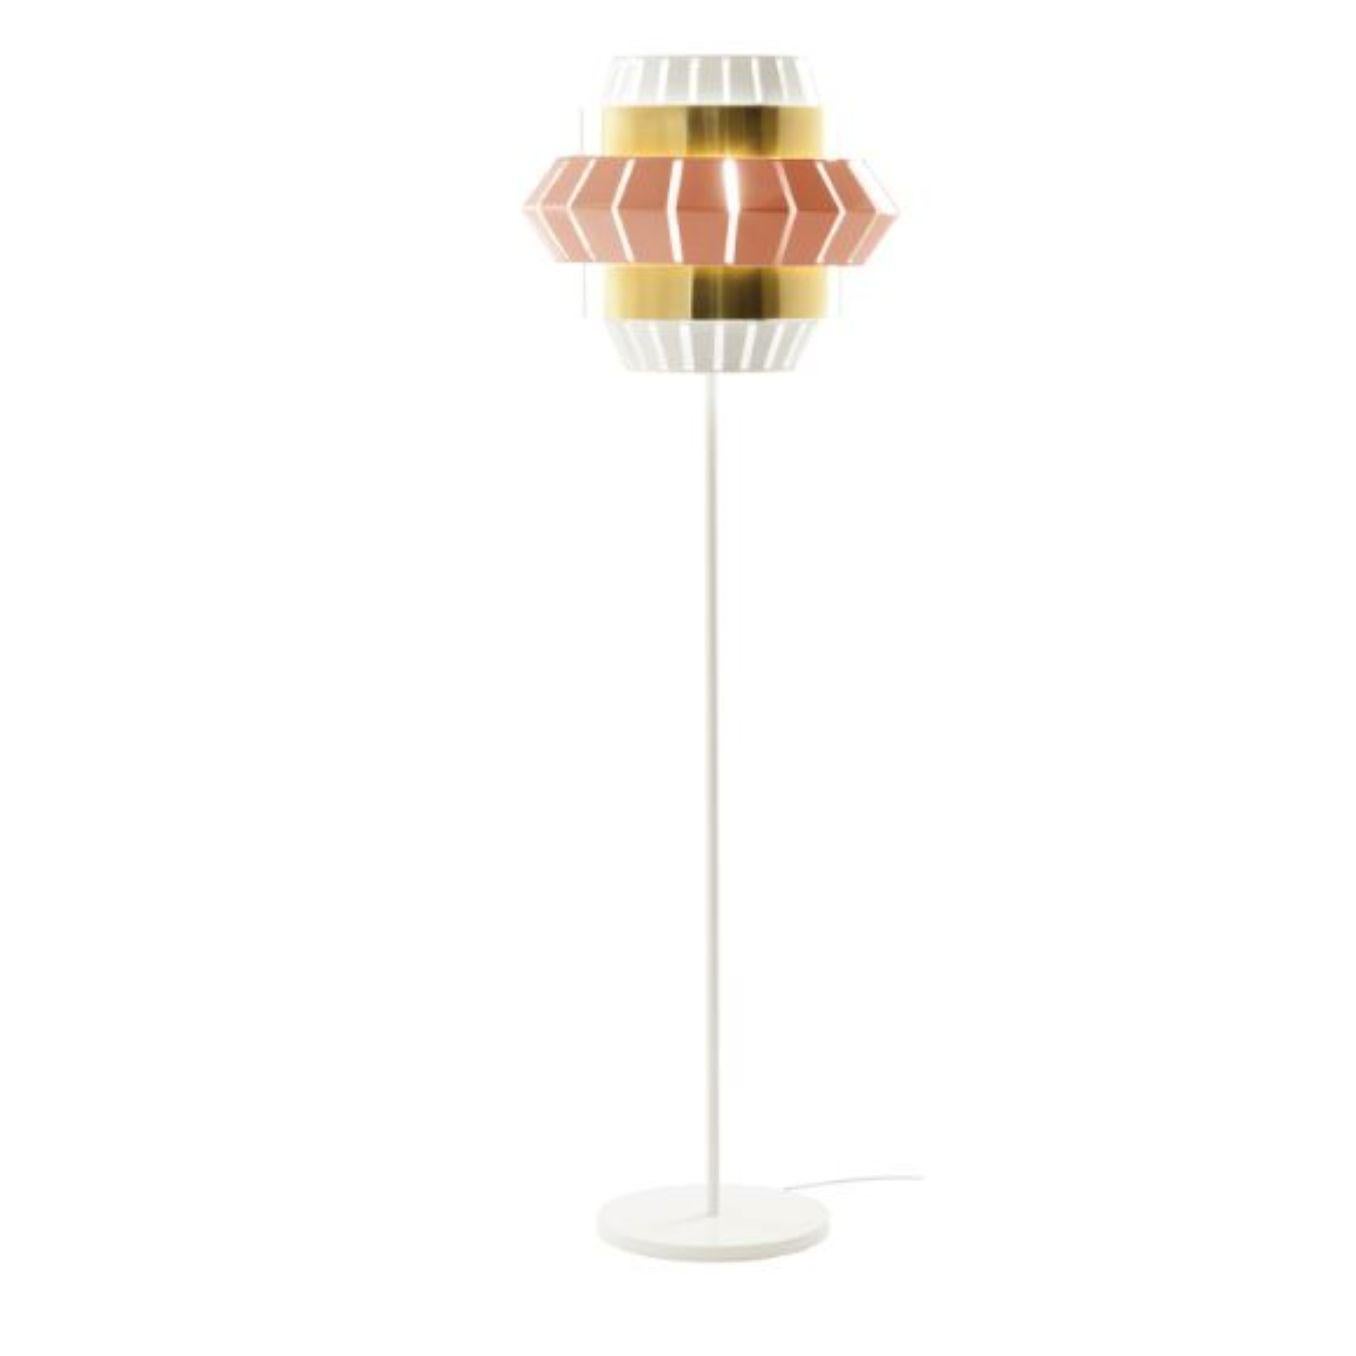 Ivory and Salmon comb floor lamp with brass ring by Dooq
Dimensions: W 54 x D 54 x H 175 cm
Materials: lacquered metal, polished brass.
Also available in different colors and materials.

Information:
230V/50Hz
E27/1x20W